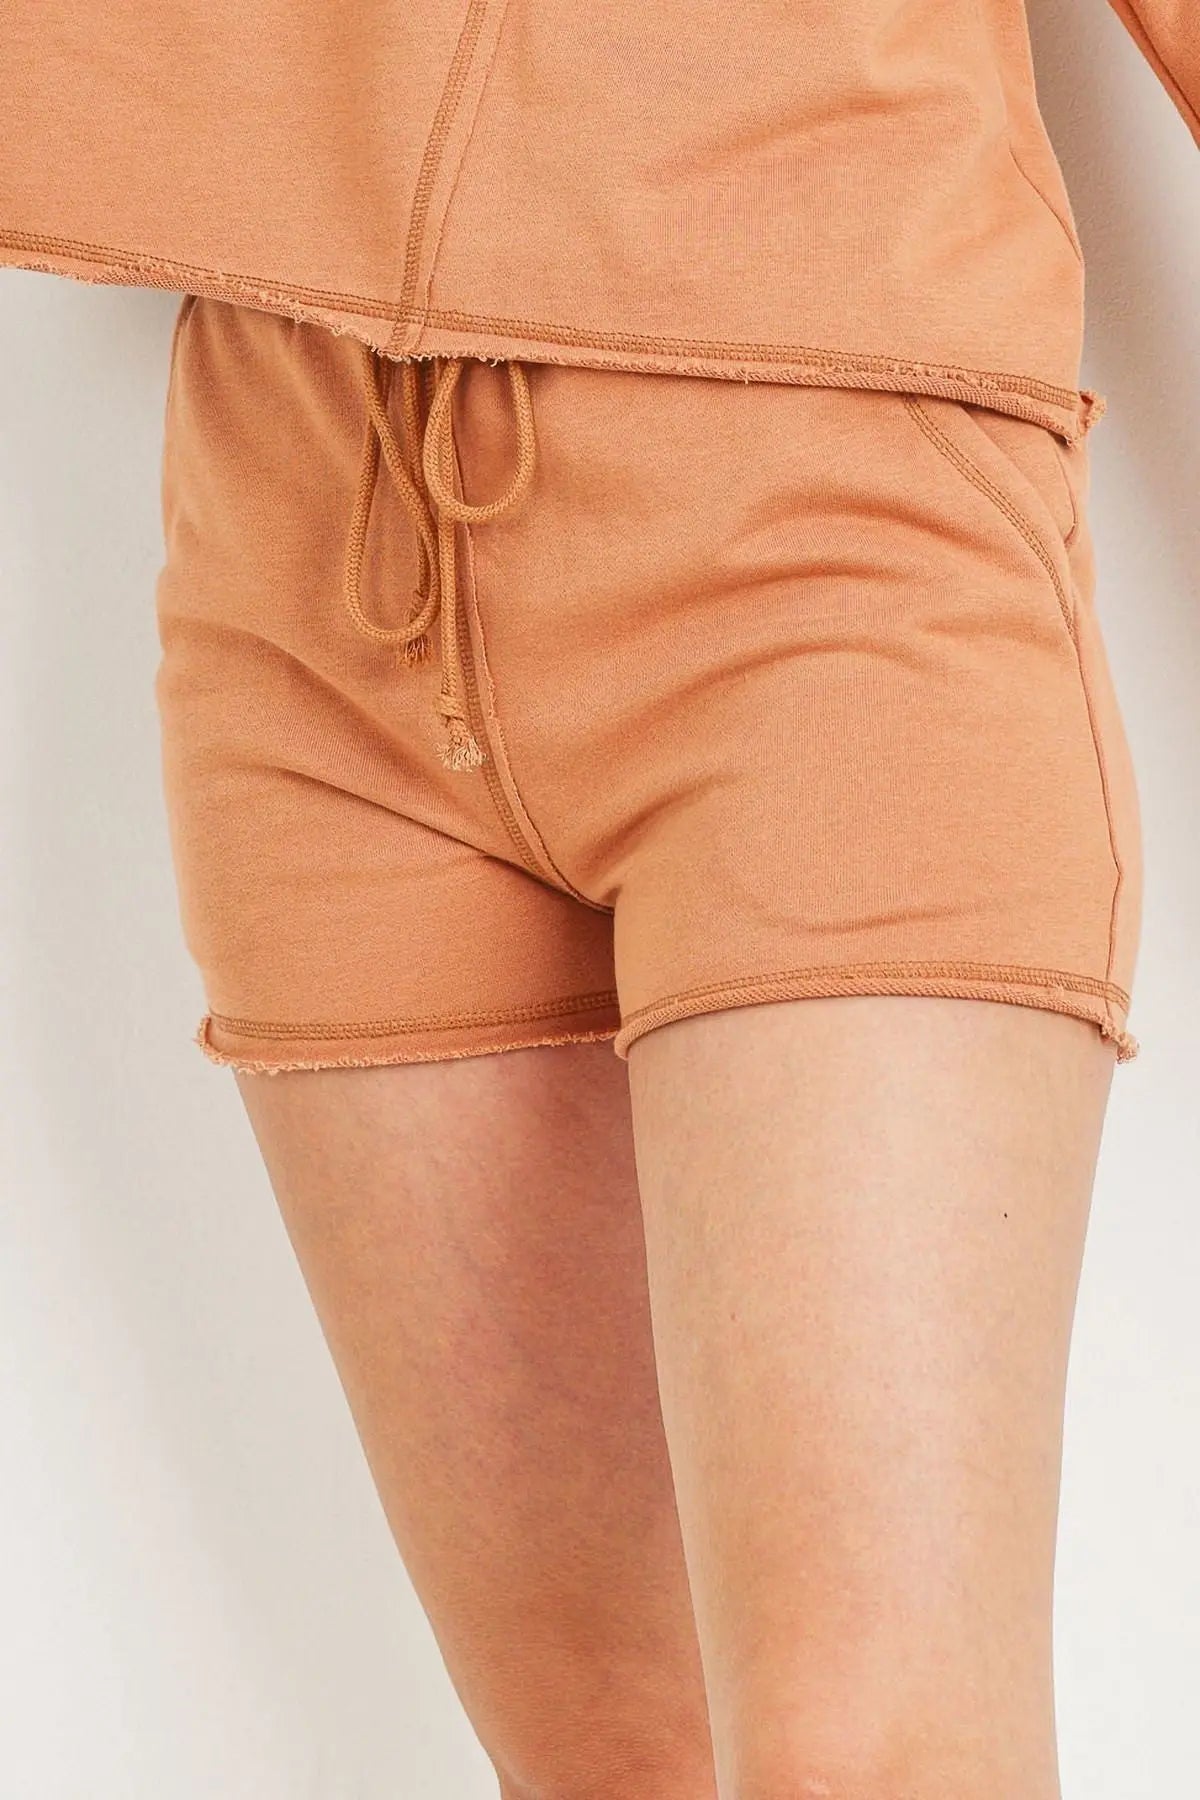 Solid French Terry Waist String With Raw Bottom Hem Shorts Sunny EvE Fashion